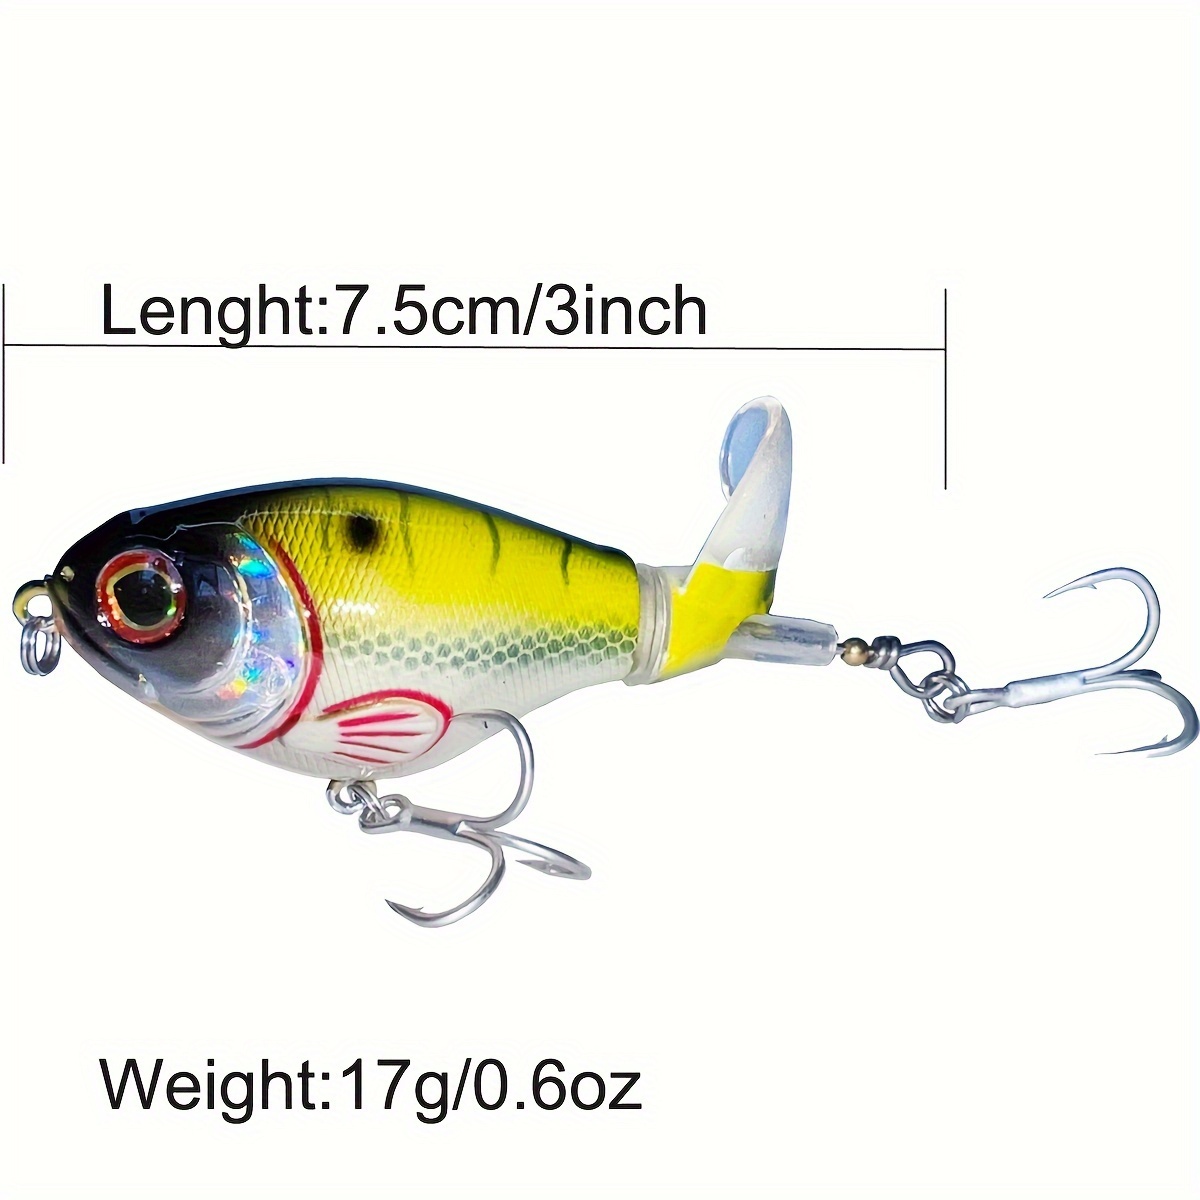 Topwater Fishing Lures for Bass Fishing with Storage Box, Whopper Popper  Fishing Lure for Bass Catfish Pike Perch, Floating Pencil Bass Bait with